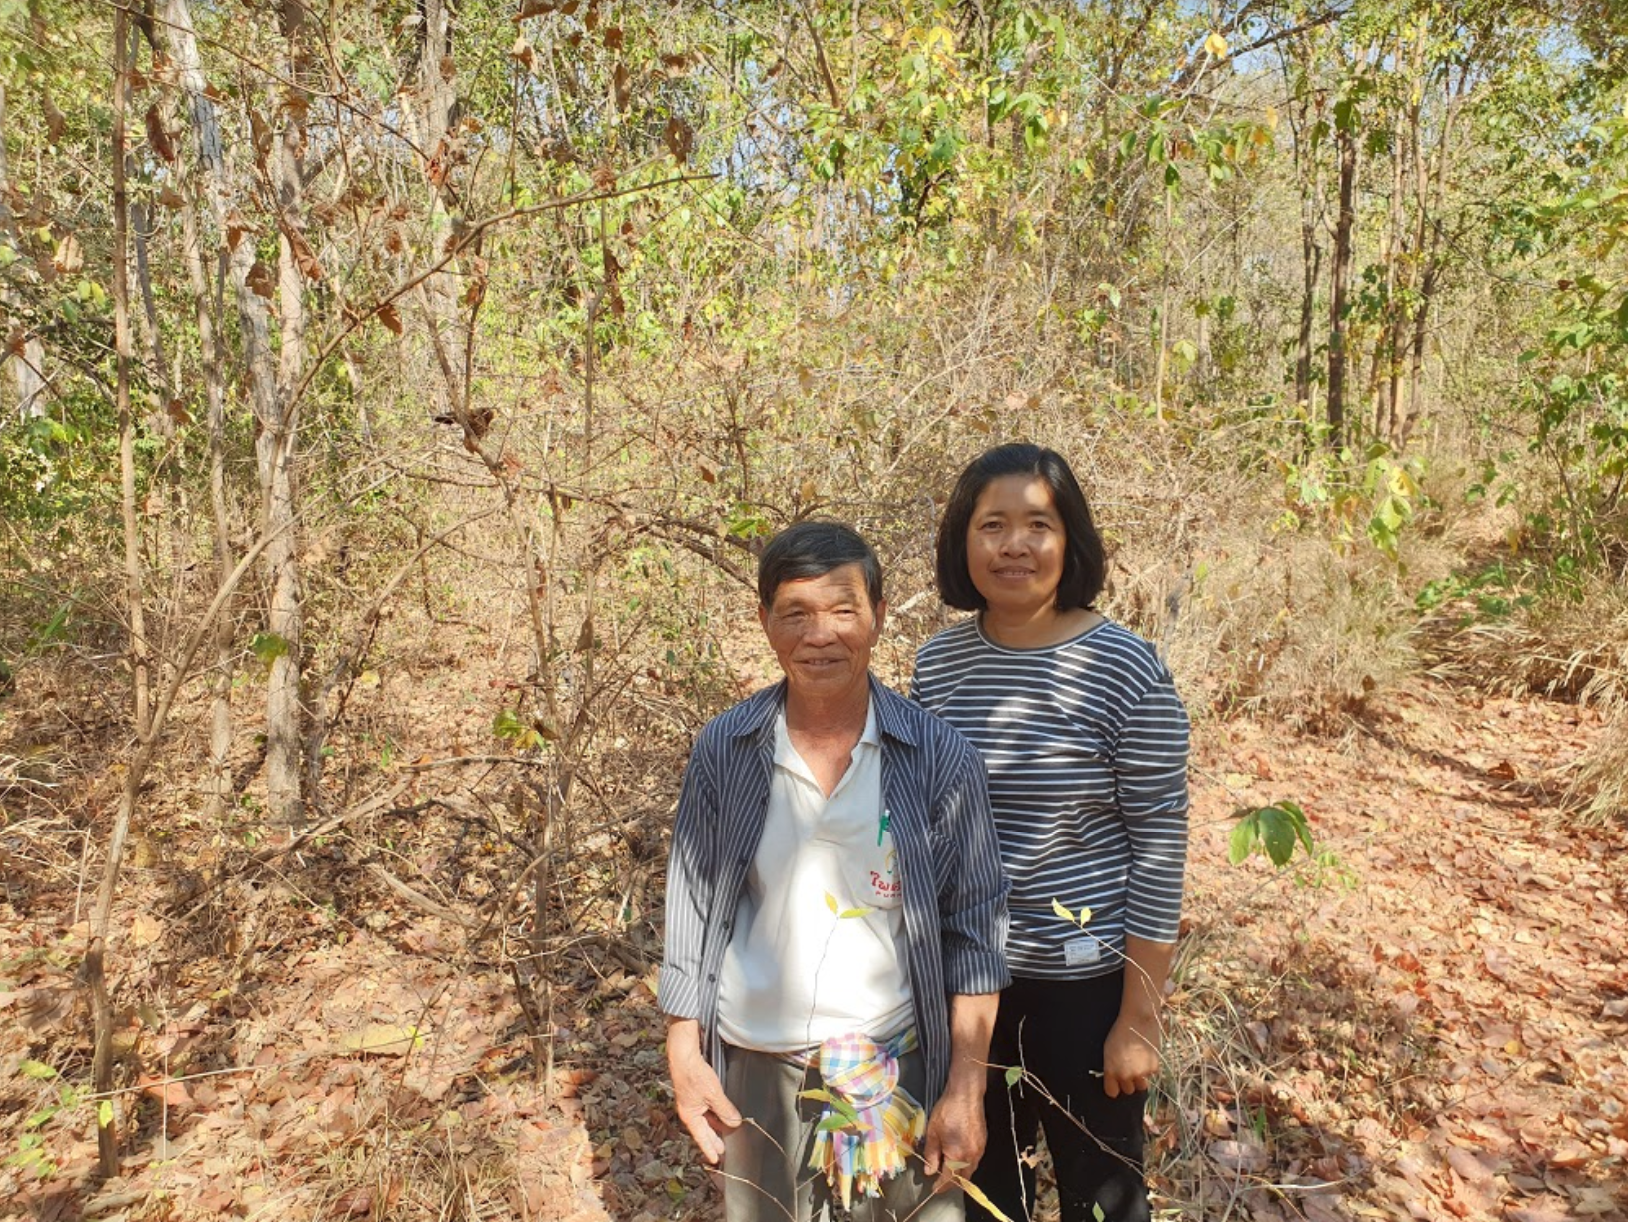 Uncle Nawm’s community forest in Thailand